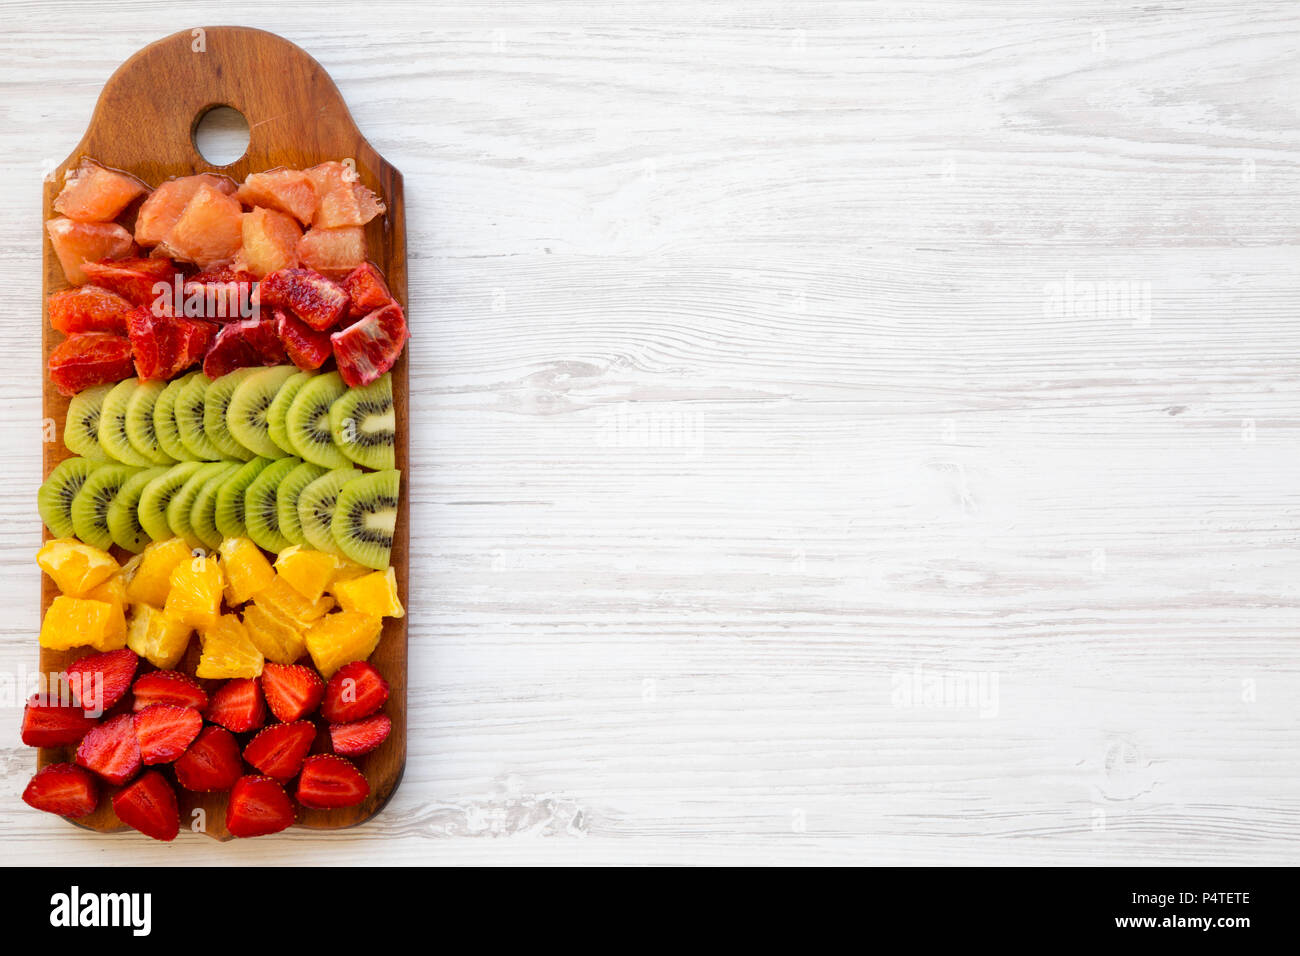 Chopped Fresh Fruits Arranged On Cutting Board On White Wooden Background  With Copy Space, Top View. Ingredients For Fruit Salad. From Above, Flat  Lay, Overhead. Stock Photo, Picture and Royalty Free Image.